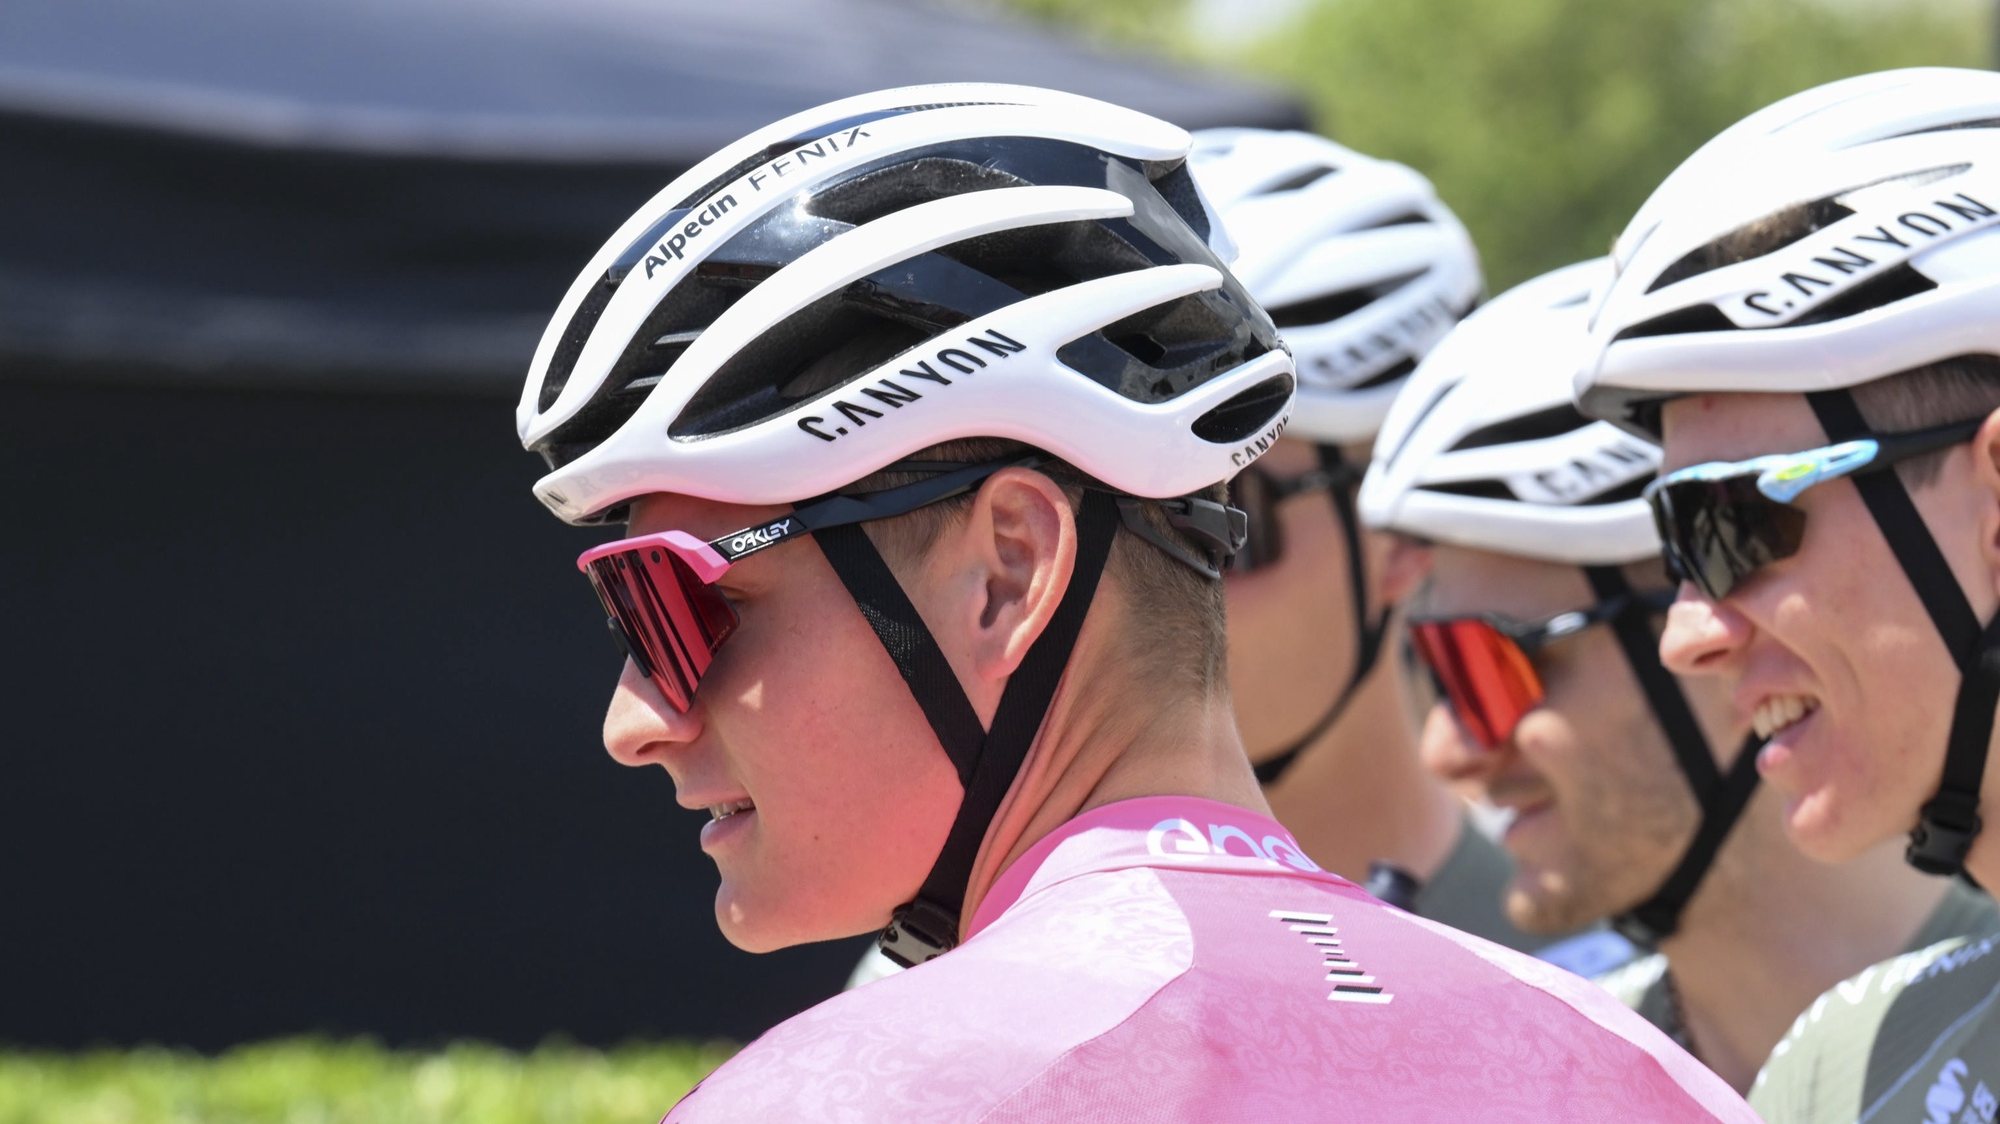 epa09938095 The overall leader, Dutch rider Mathieu Van Der Poel of Alpecin-Fenix team, before the start of the fourth stage of the 105th Giro d&#039;Italia cycling tour, a race over of 172 km from Avola to Etna-Nicolosi, Italy, 10 May 2022.  EPA/MAURIZIO BRAMBATTI